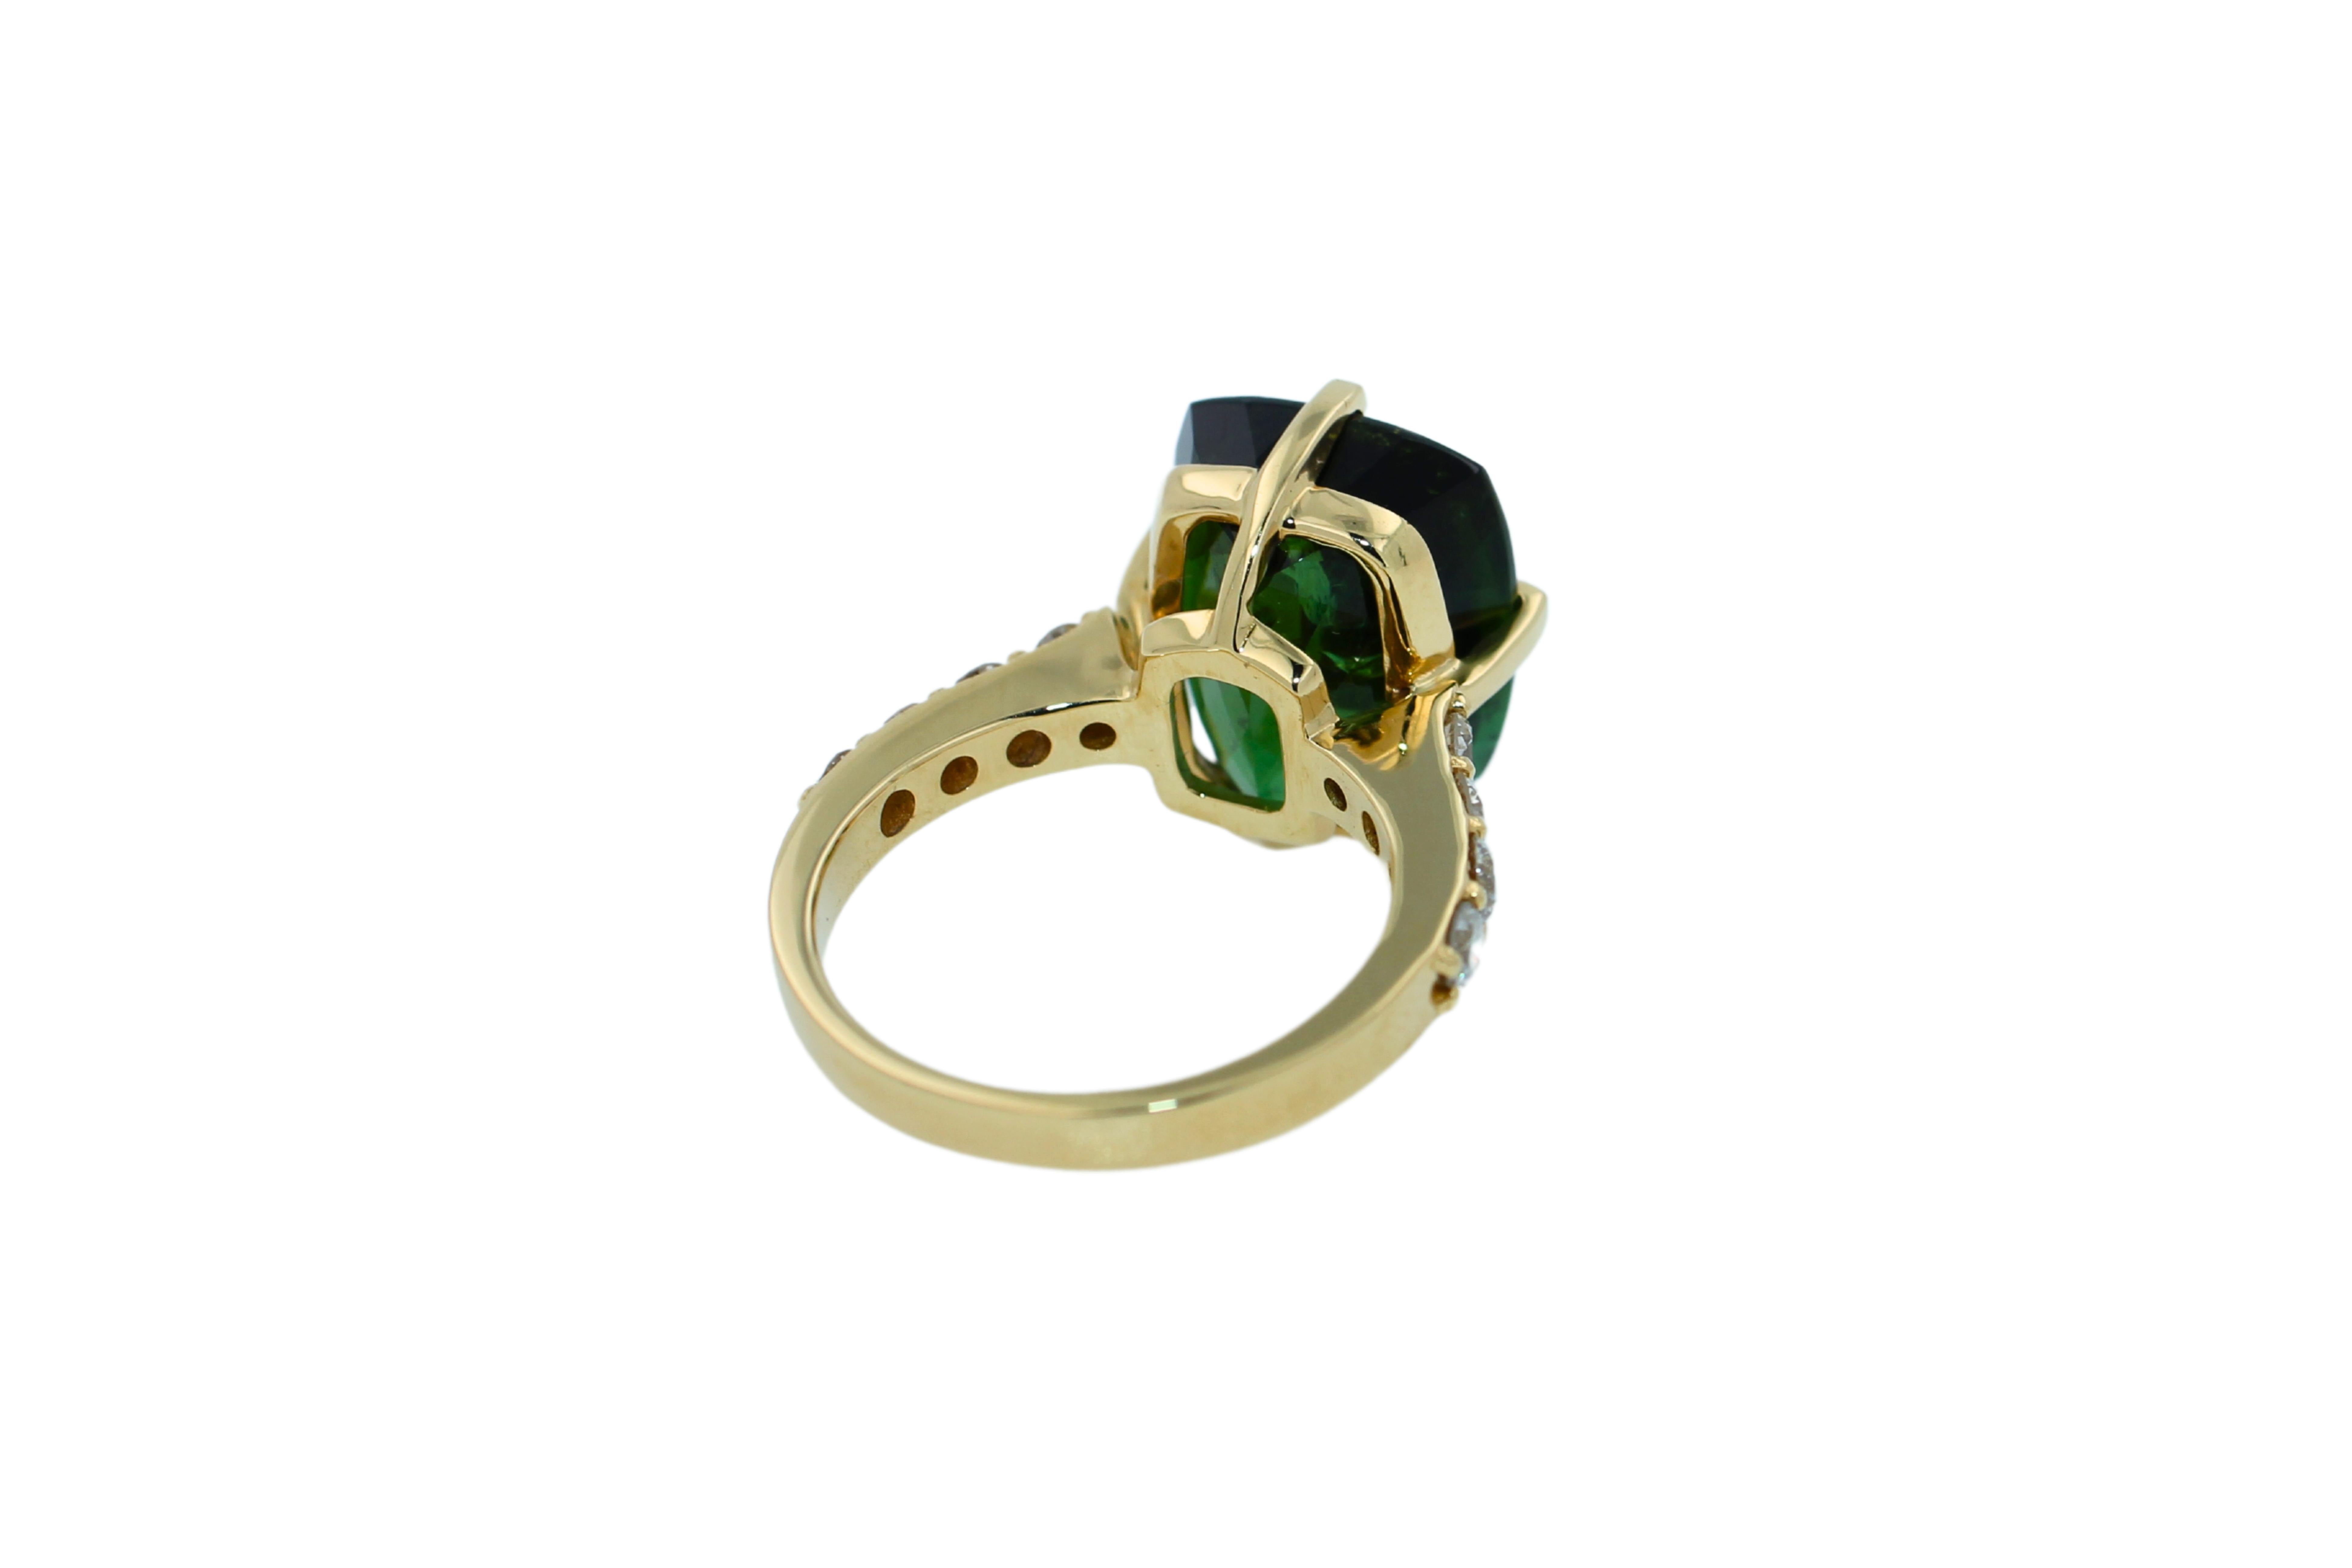 Elongated Cushion Green Tourmaline Diamond Cocktail Solitaire Prongset Gold Ring For Sale 2